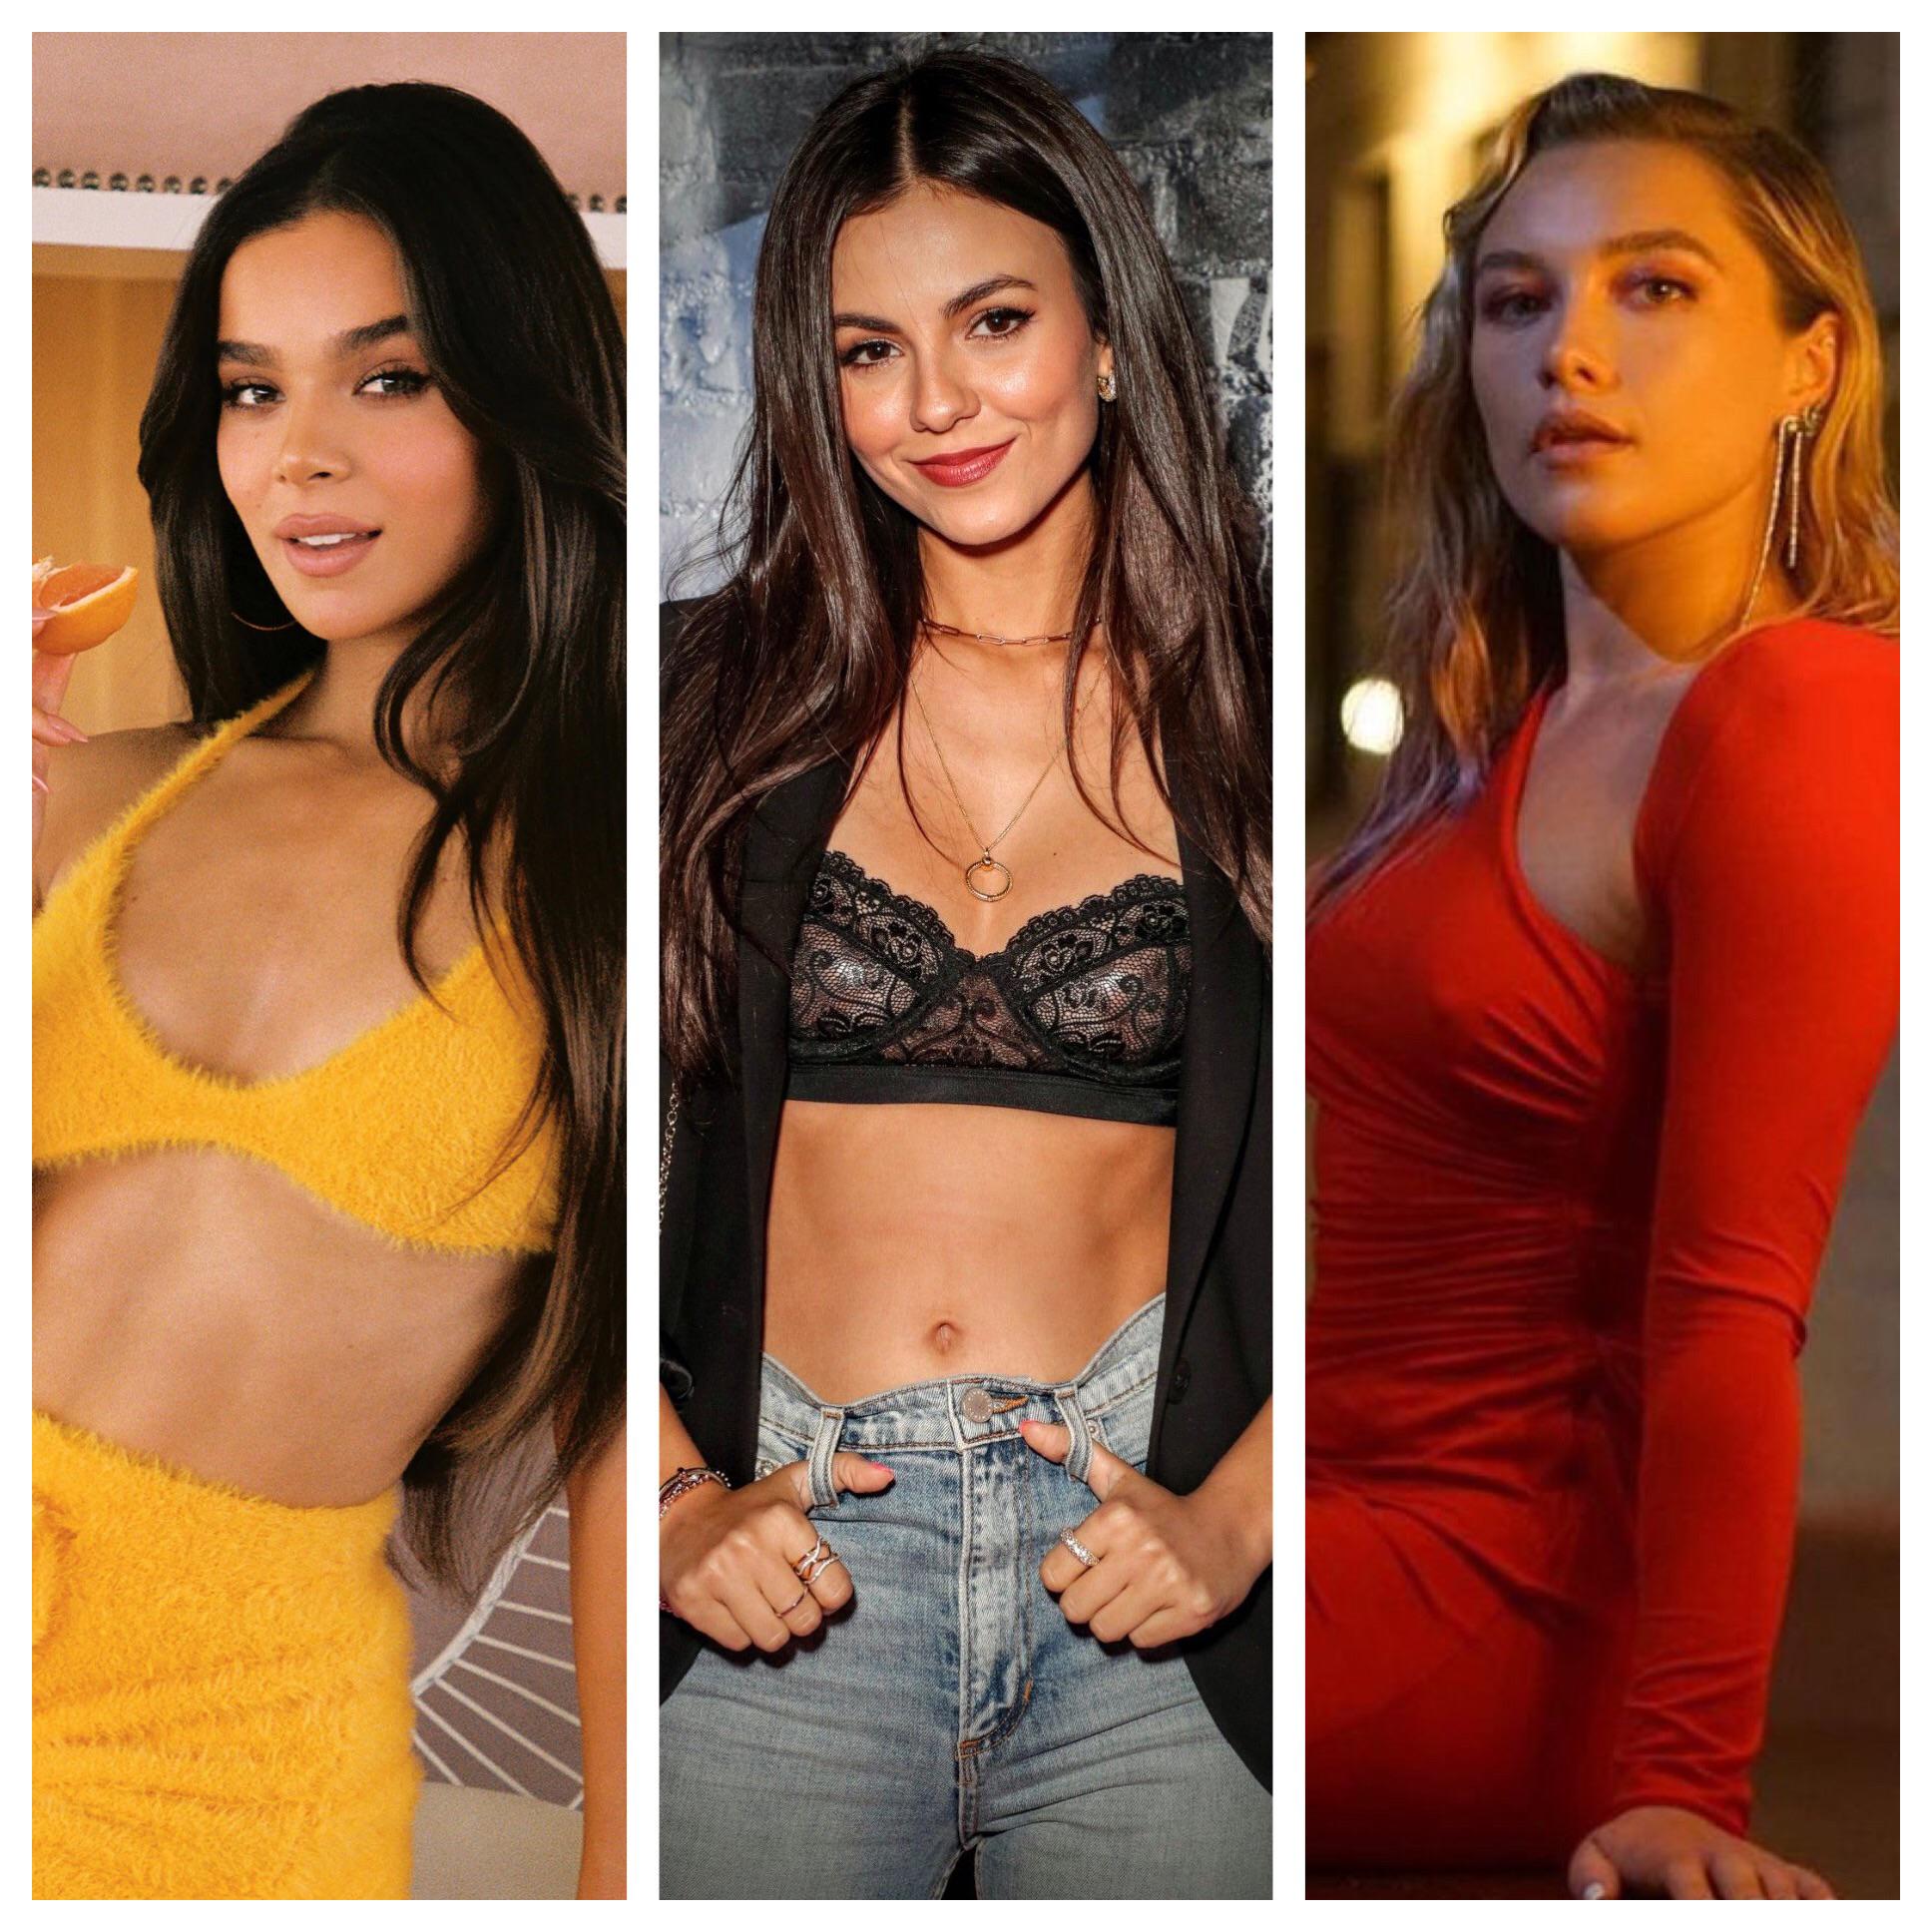 Hailee Steinfeld Victoria Justice Florence Pugh Apm Whos Your Pick Scrolller 